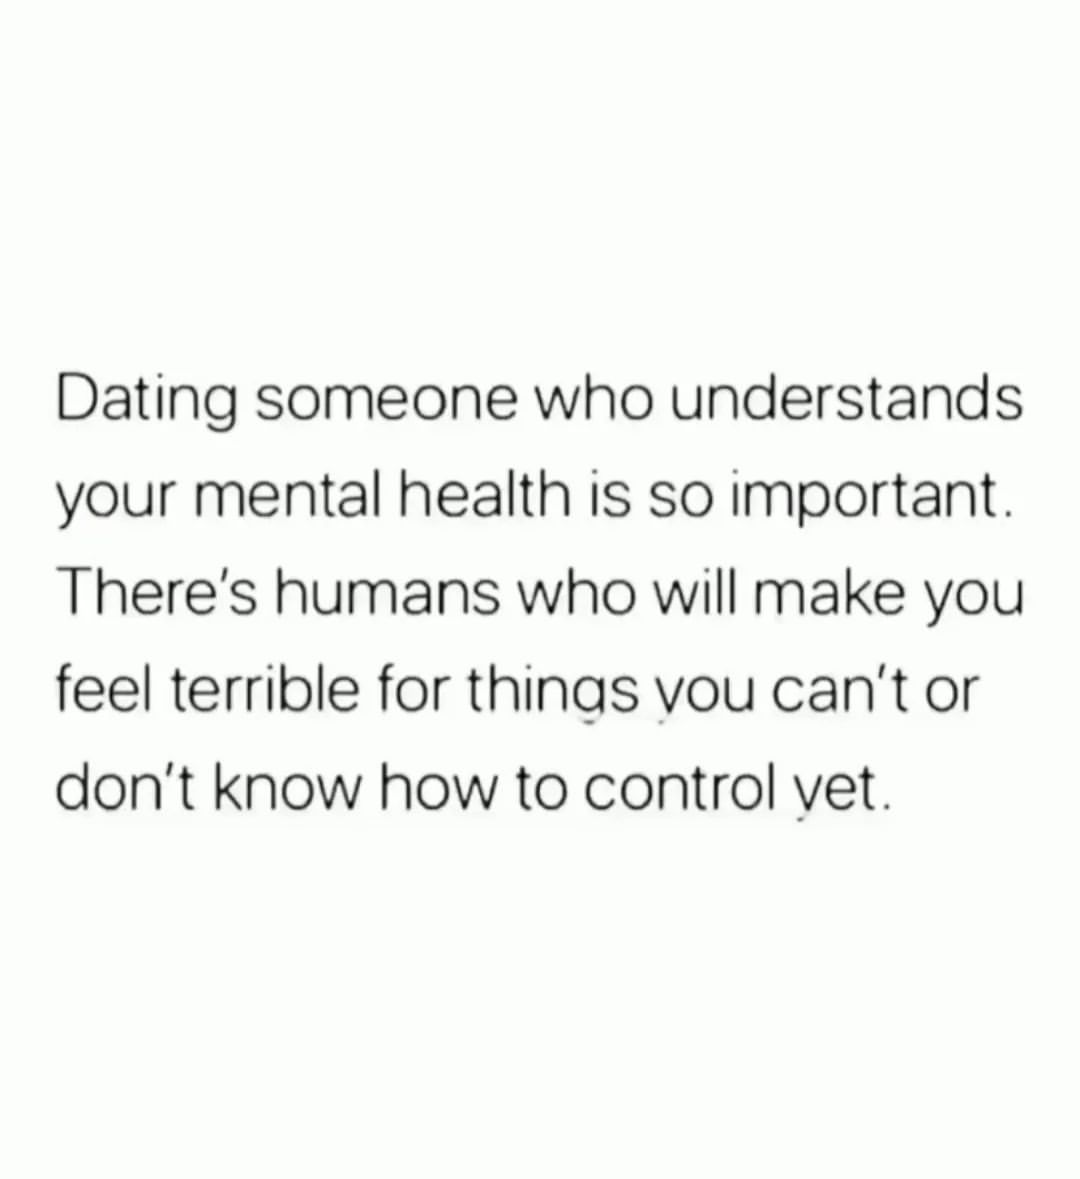 Dating someone who understands your mental health is so important. There's humans who will make you feel terrible for things you can't or don't know how to control yet.